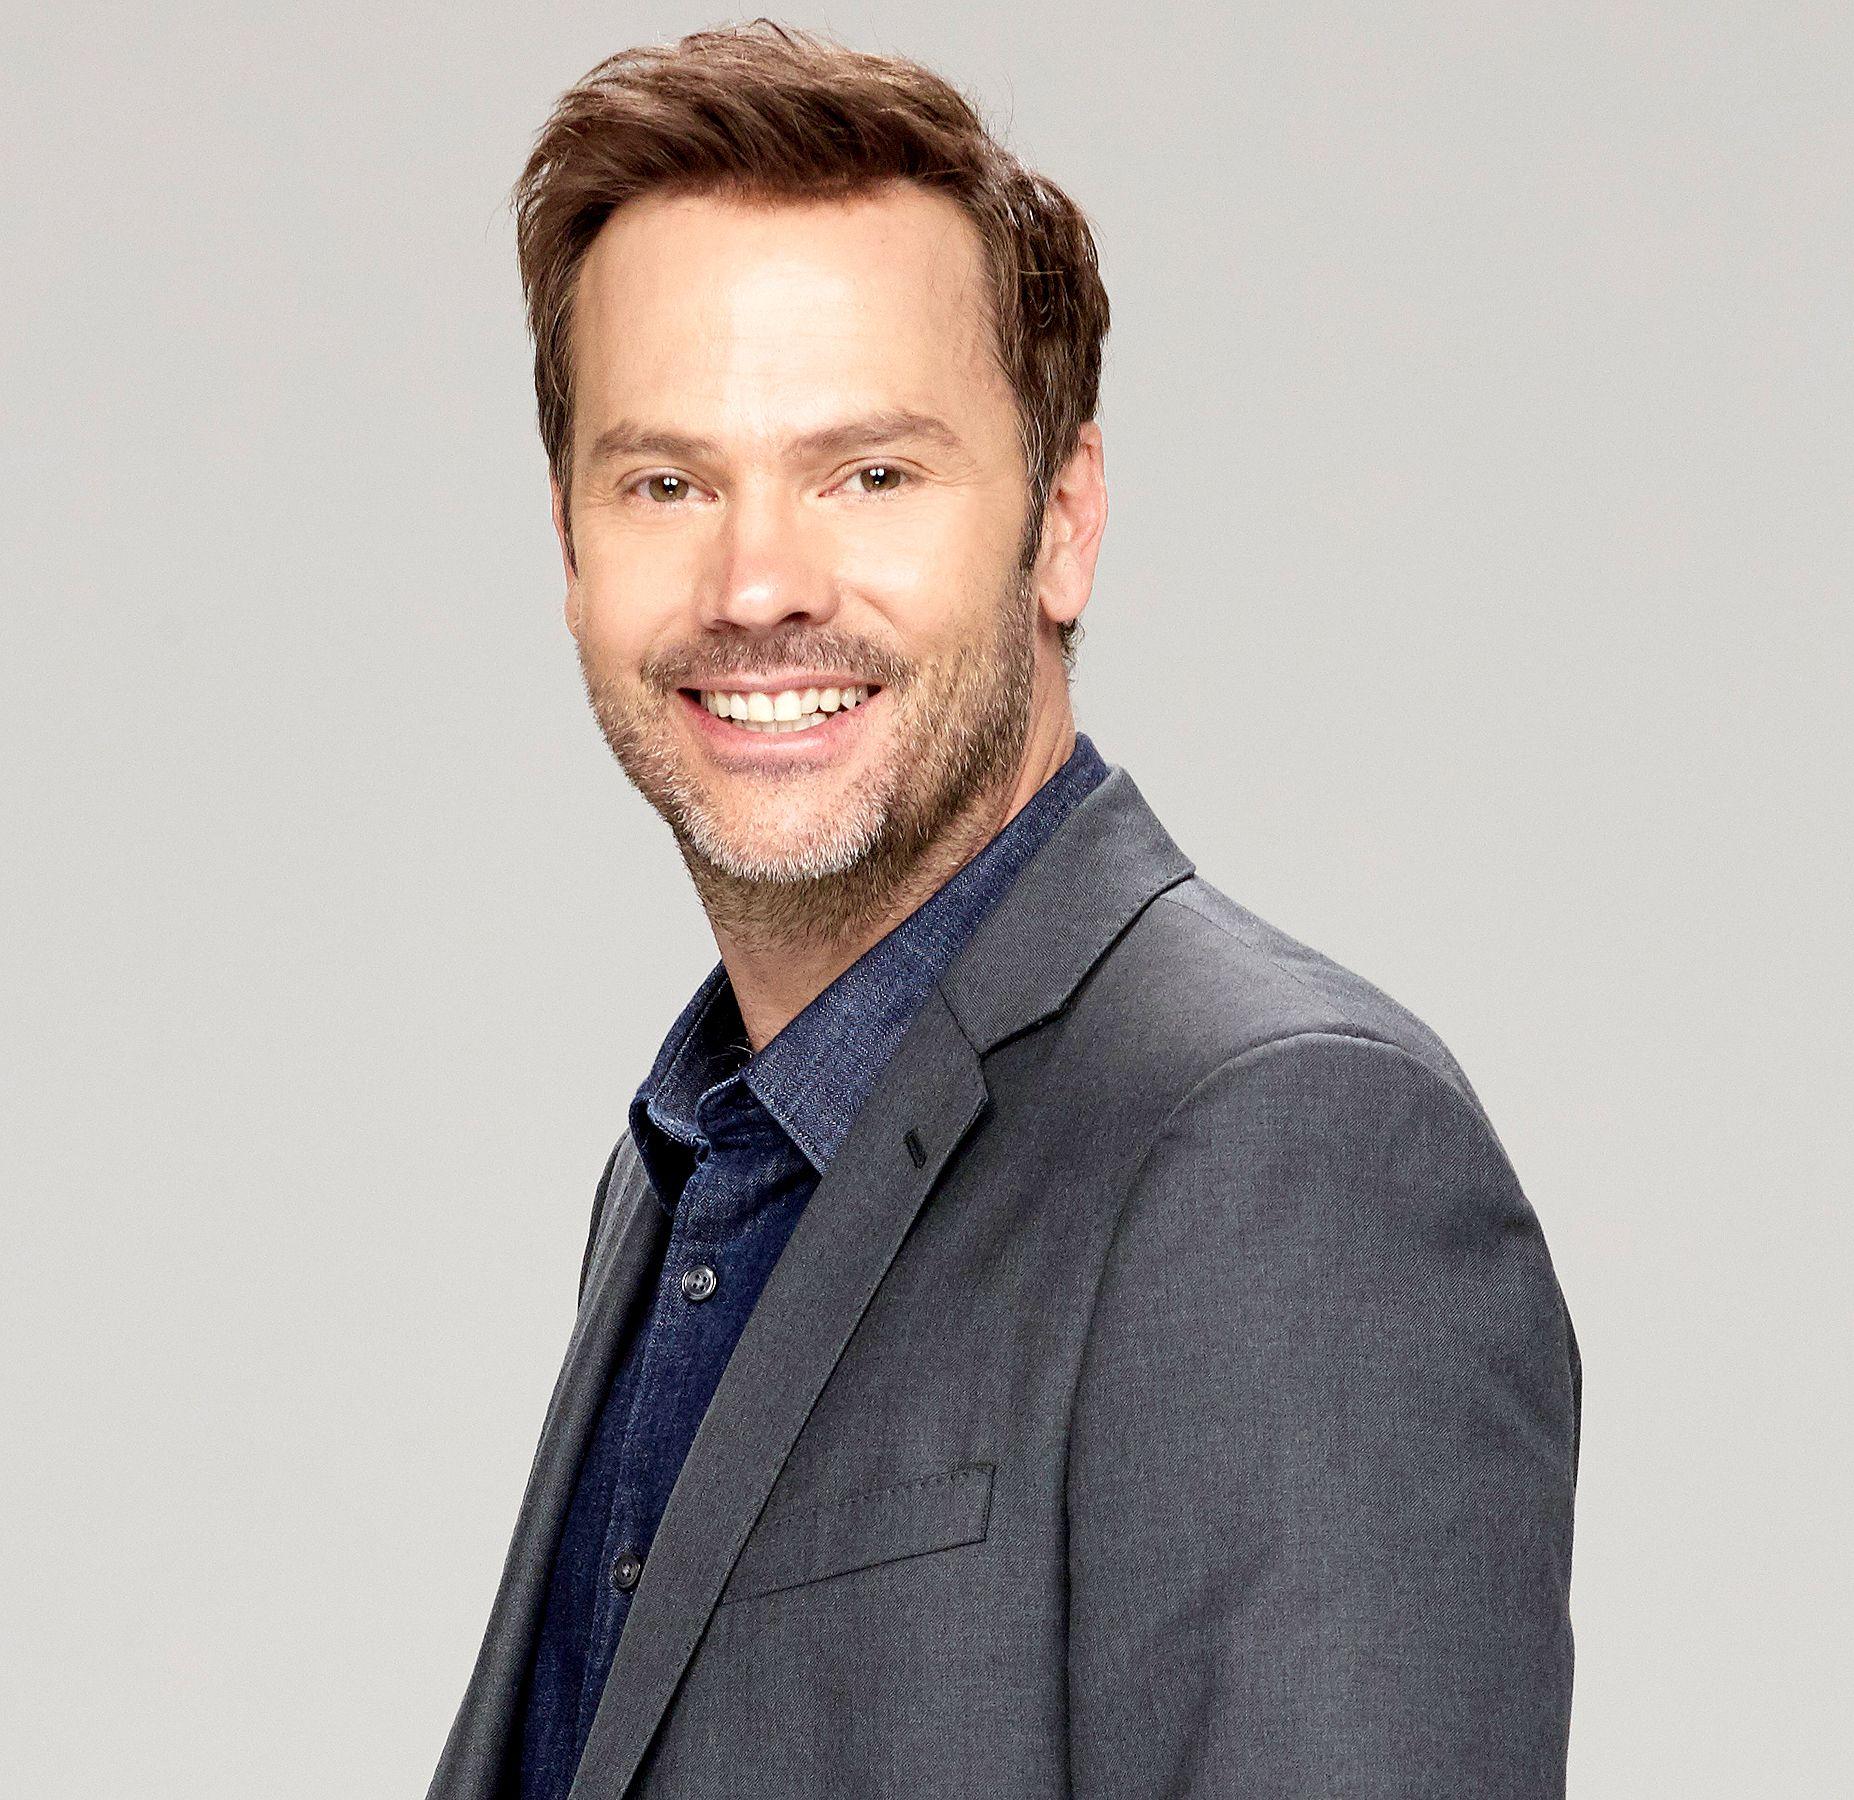 Barry Watson: 25 Things You Don't Know About Me